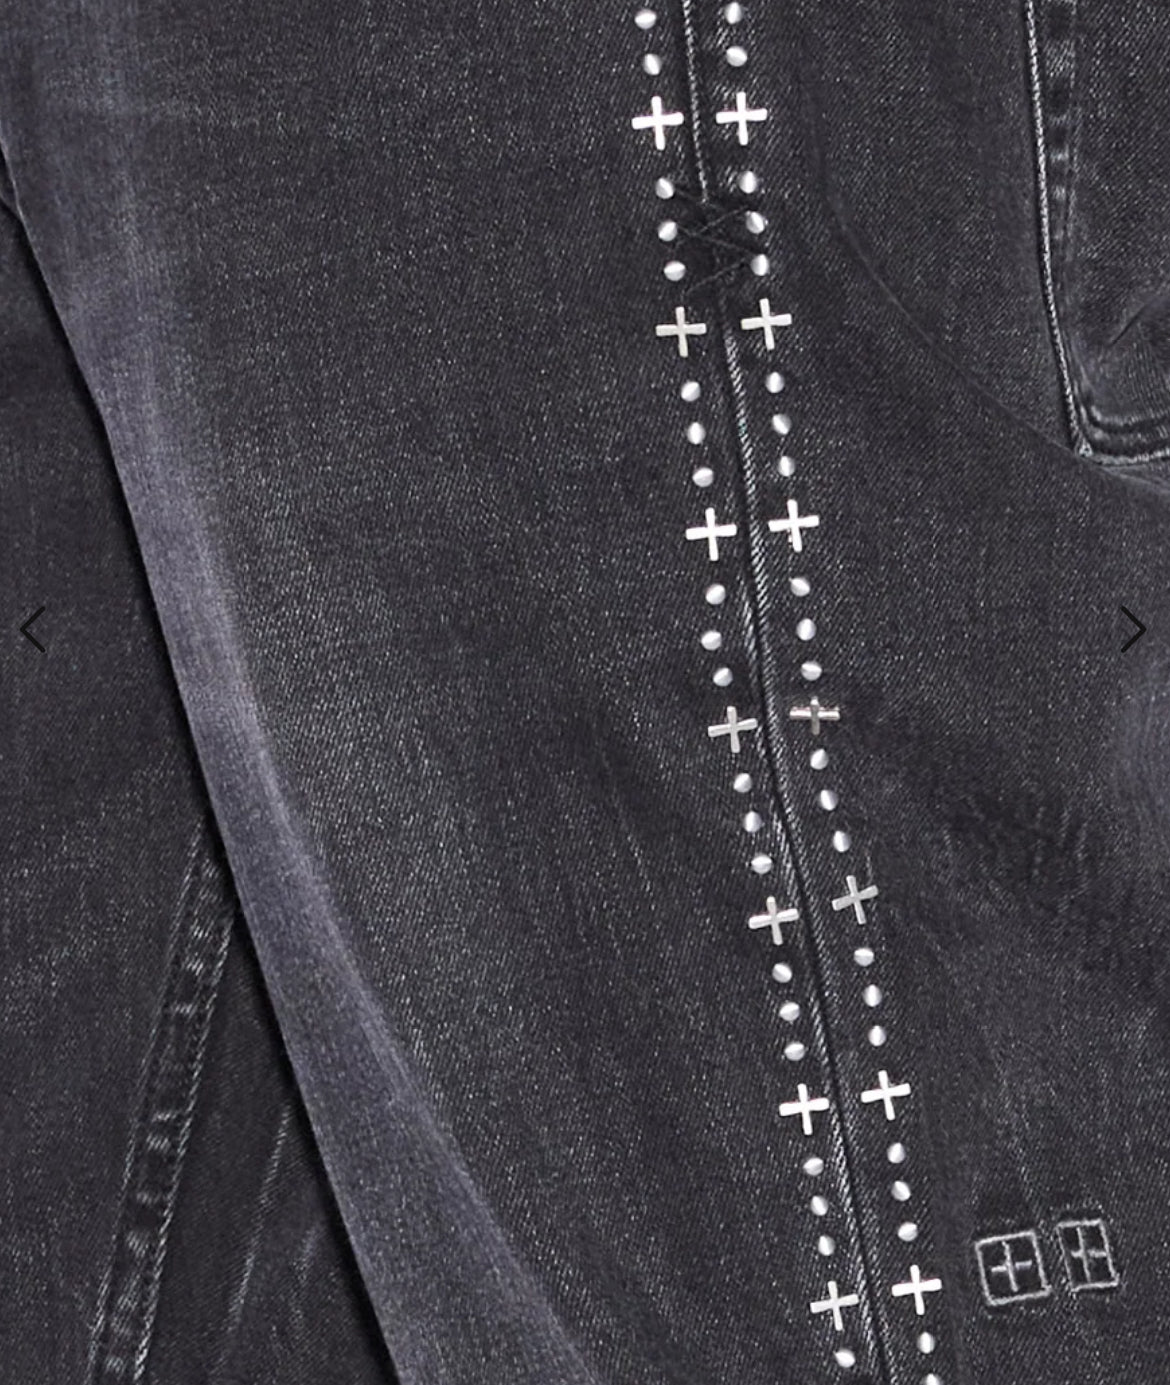 A close up of a pair of KSUBI jeans with cross stitching.